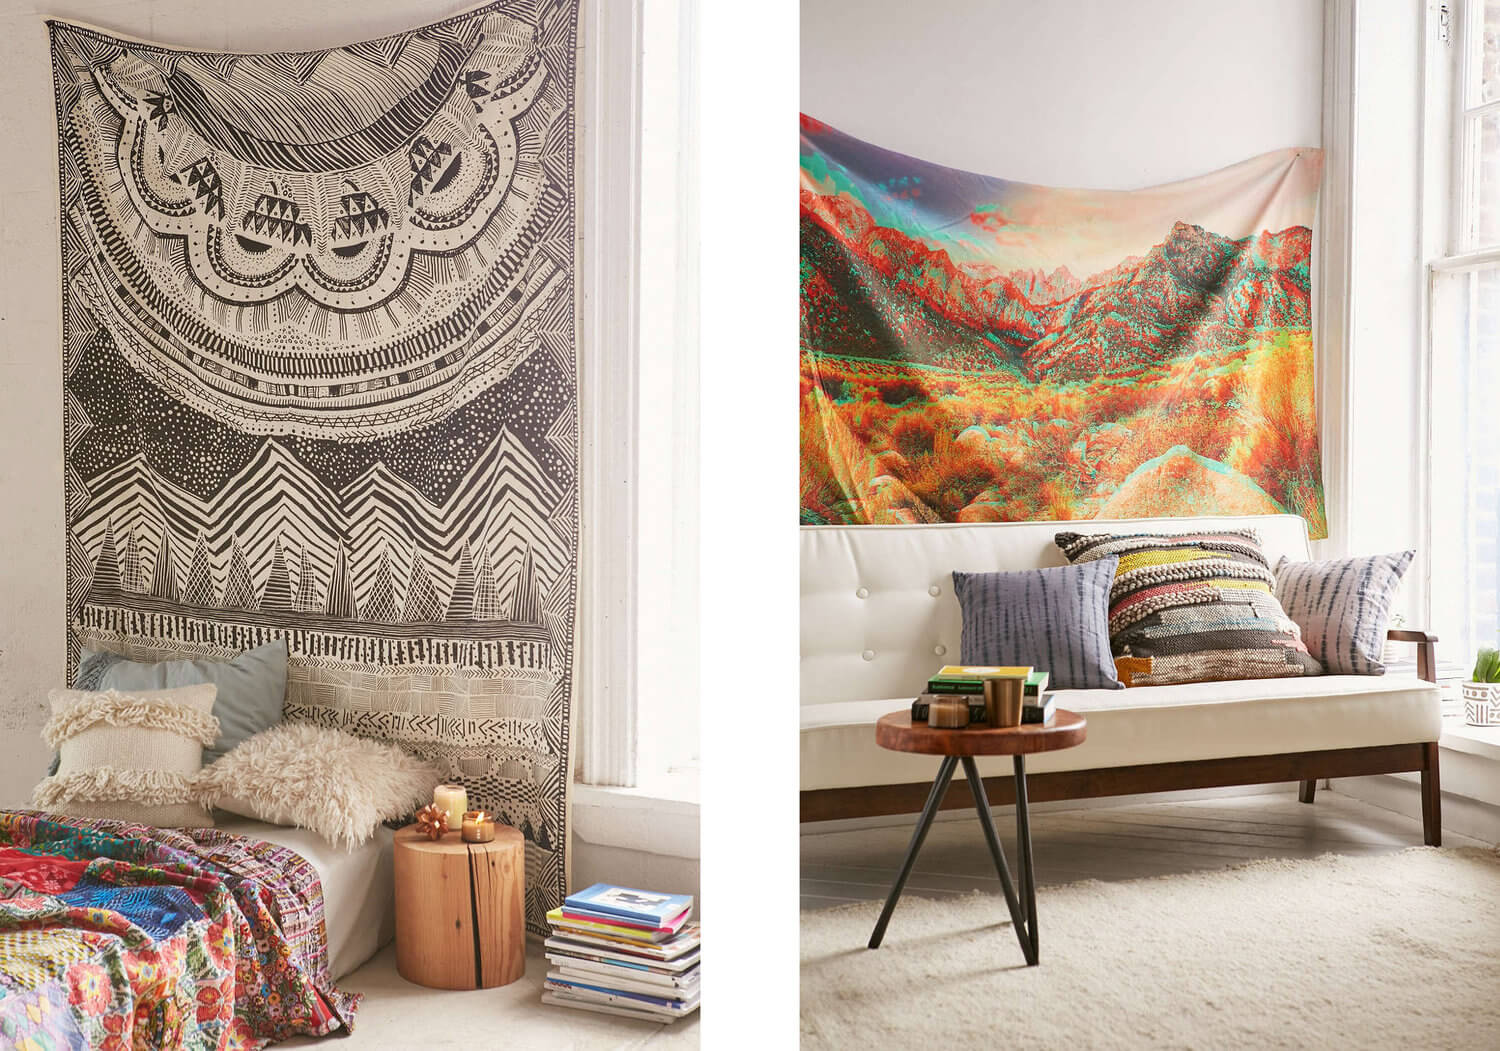 25 New Urban Outfitters Home Decor Products You Must See